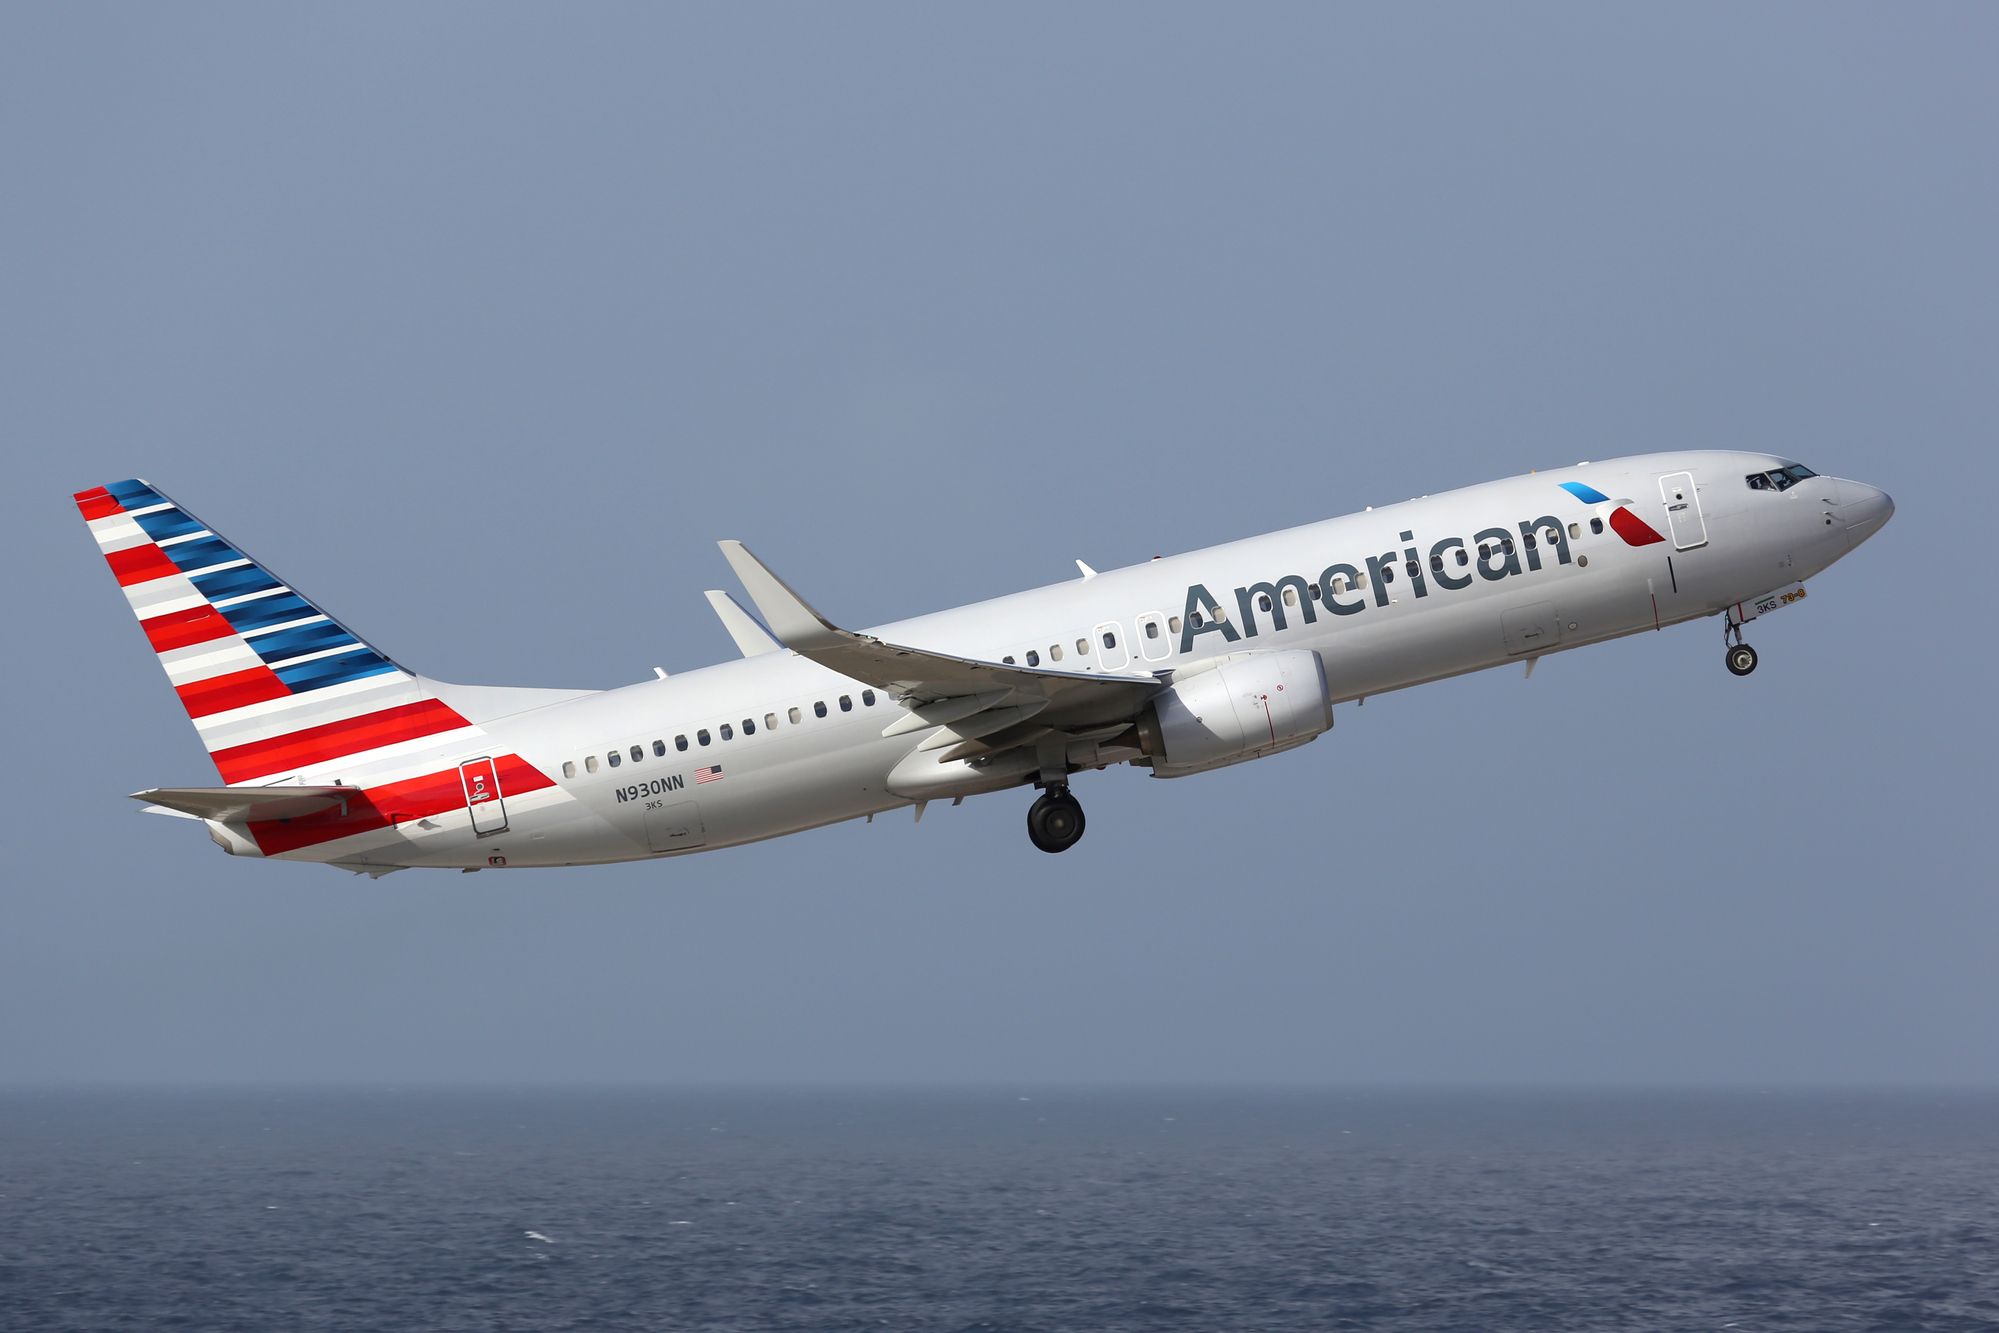 American Airlines Boeing 737-800 in new livery